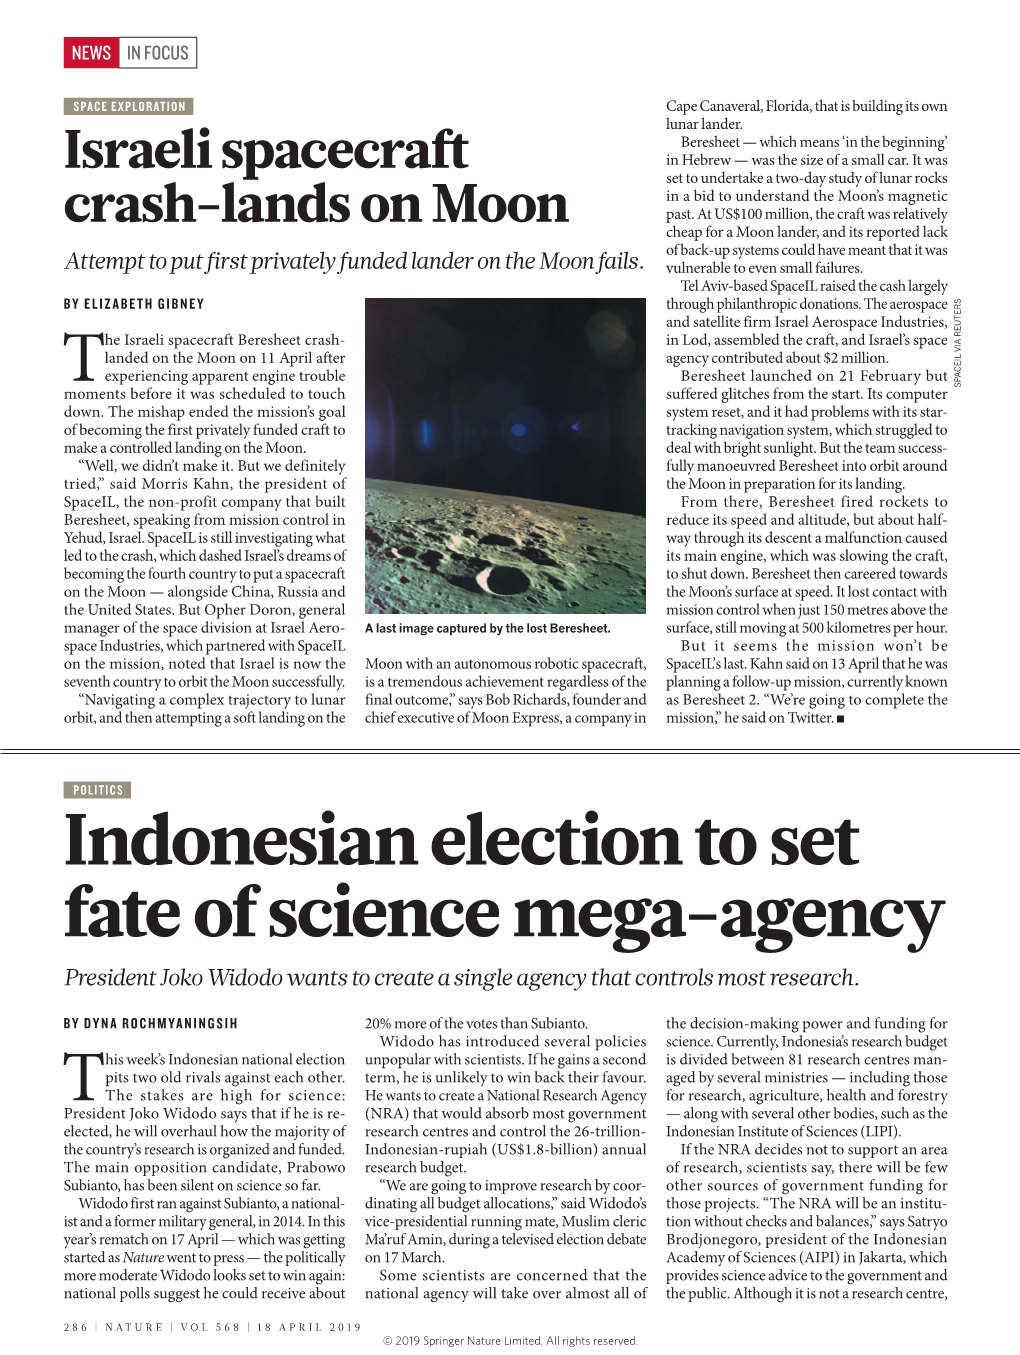 Indonesian Election to Set Fate of Science Mega-Agency President Joko Widodo Wants to Create a Single Agency That Controls Most Research